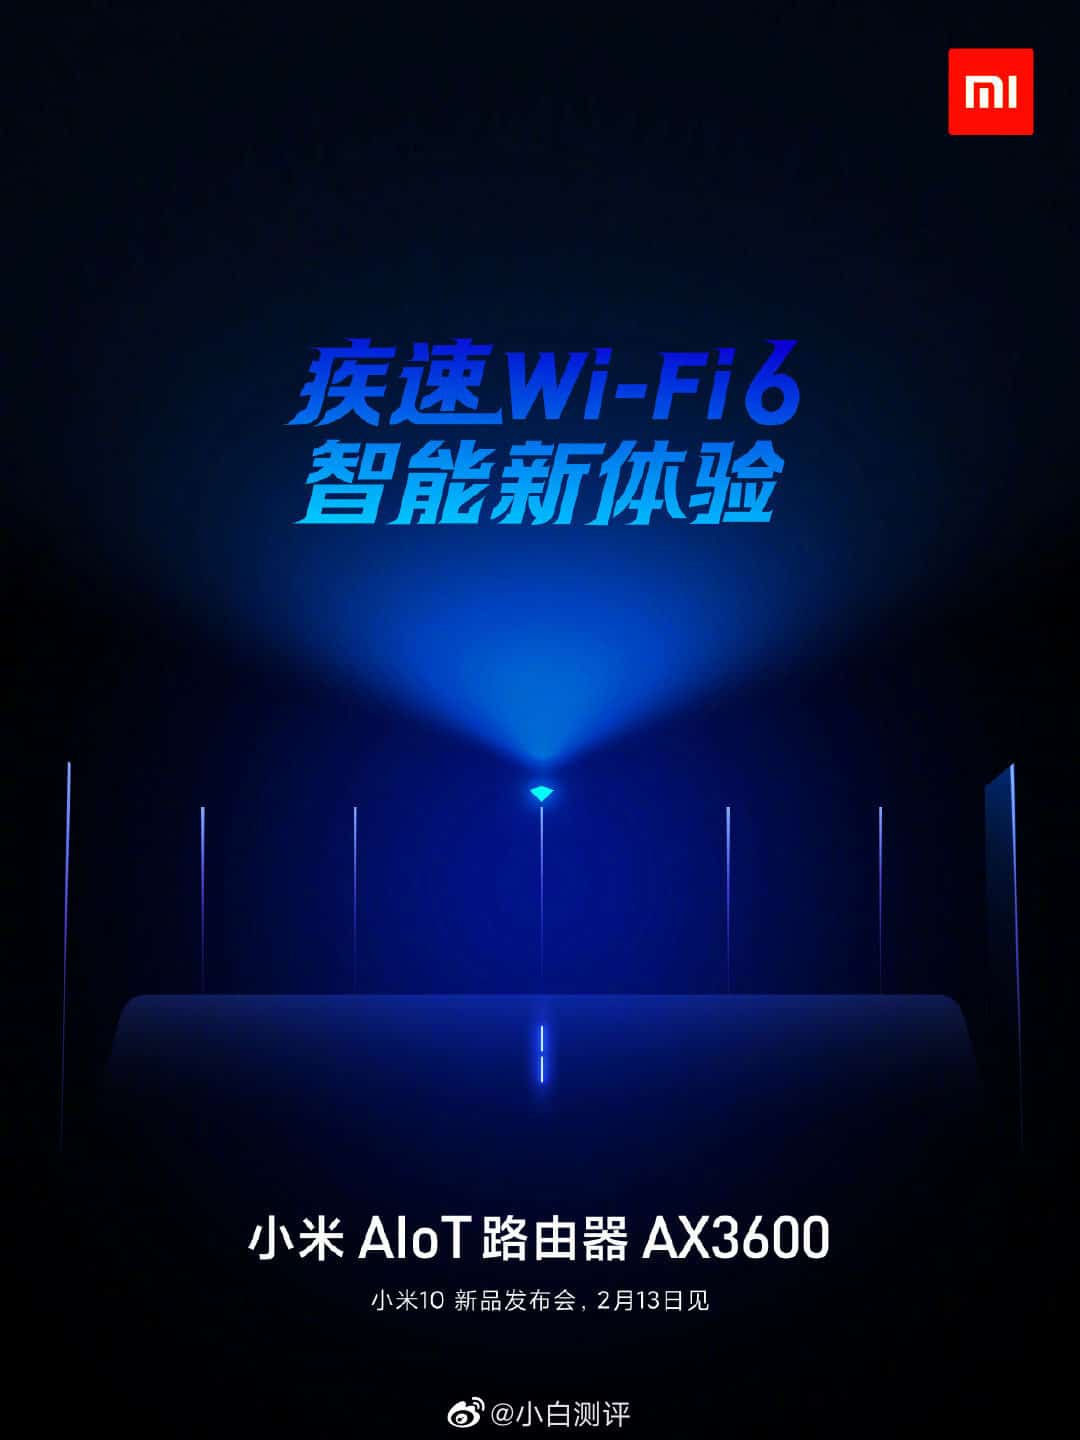 Xiaomi Wi-Fi 6 Router is coming